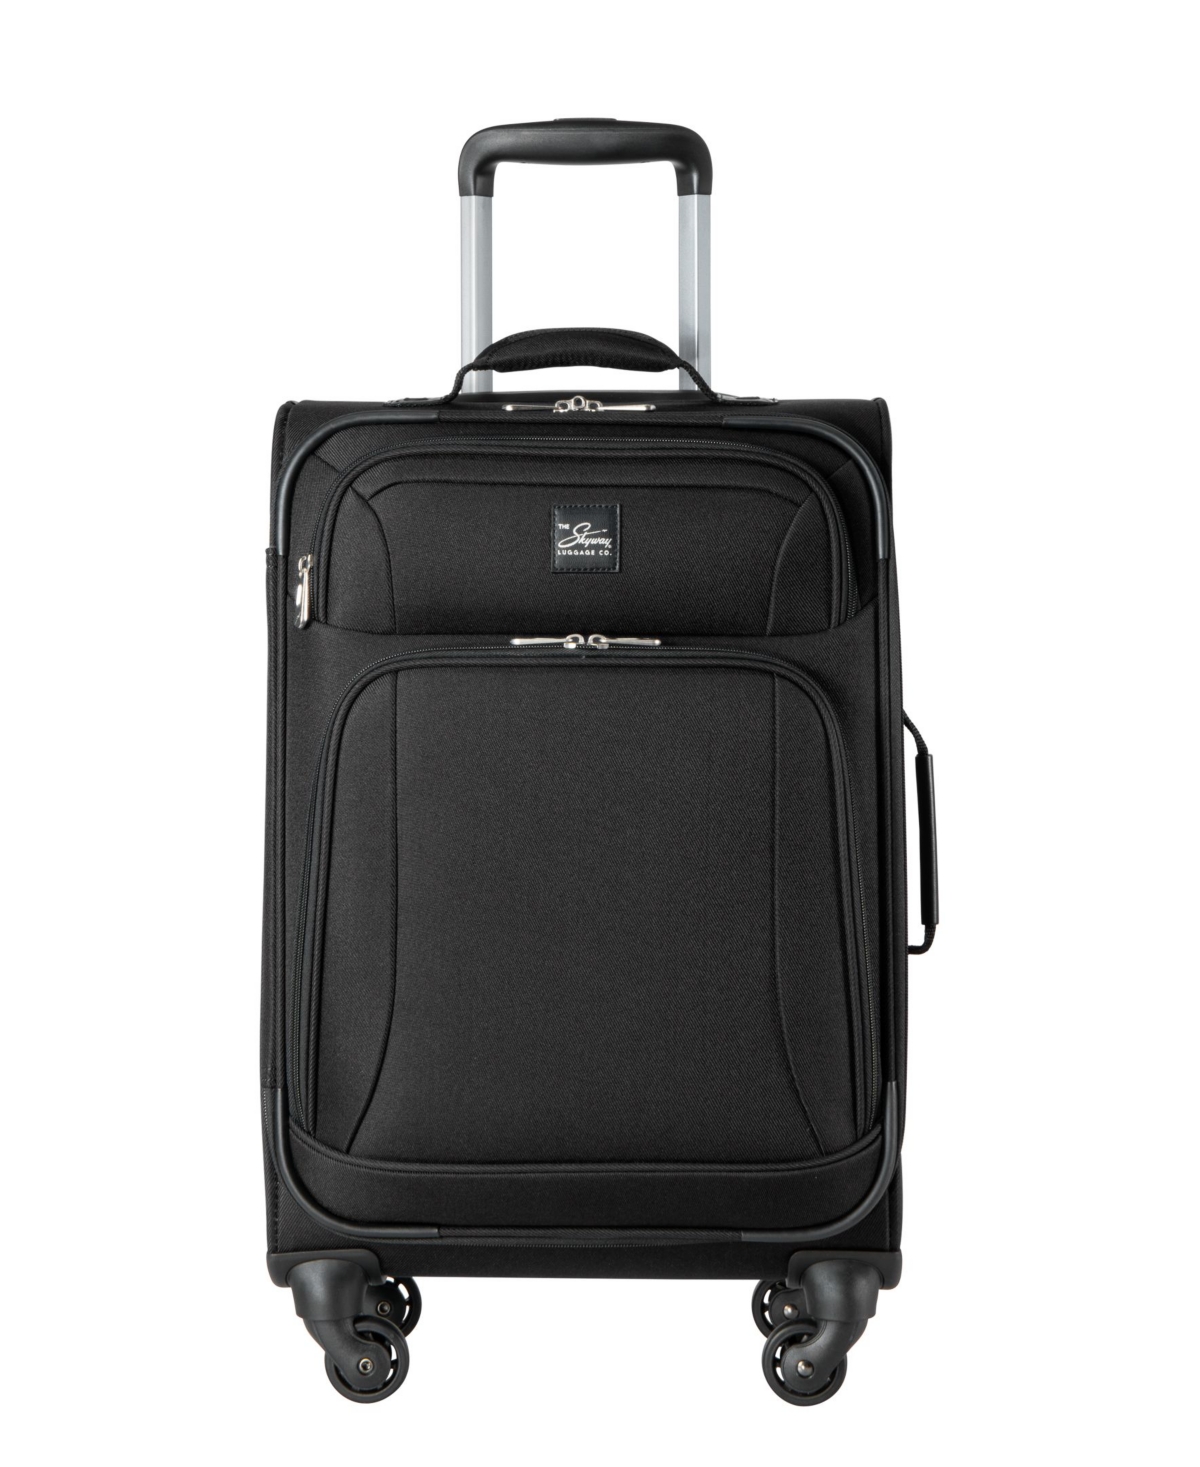 Epic 20" Carry-On Spinner Suitcase - Surf Blue